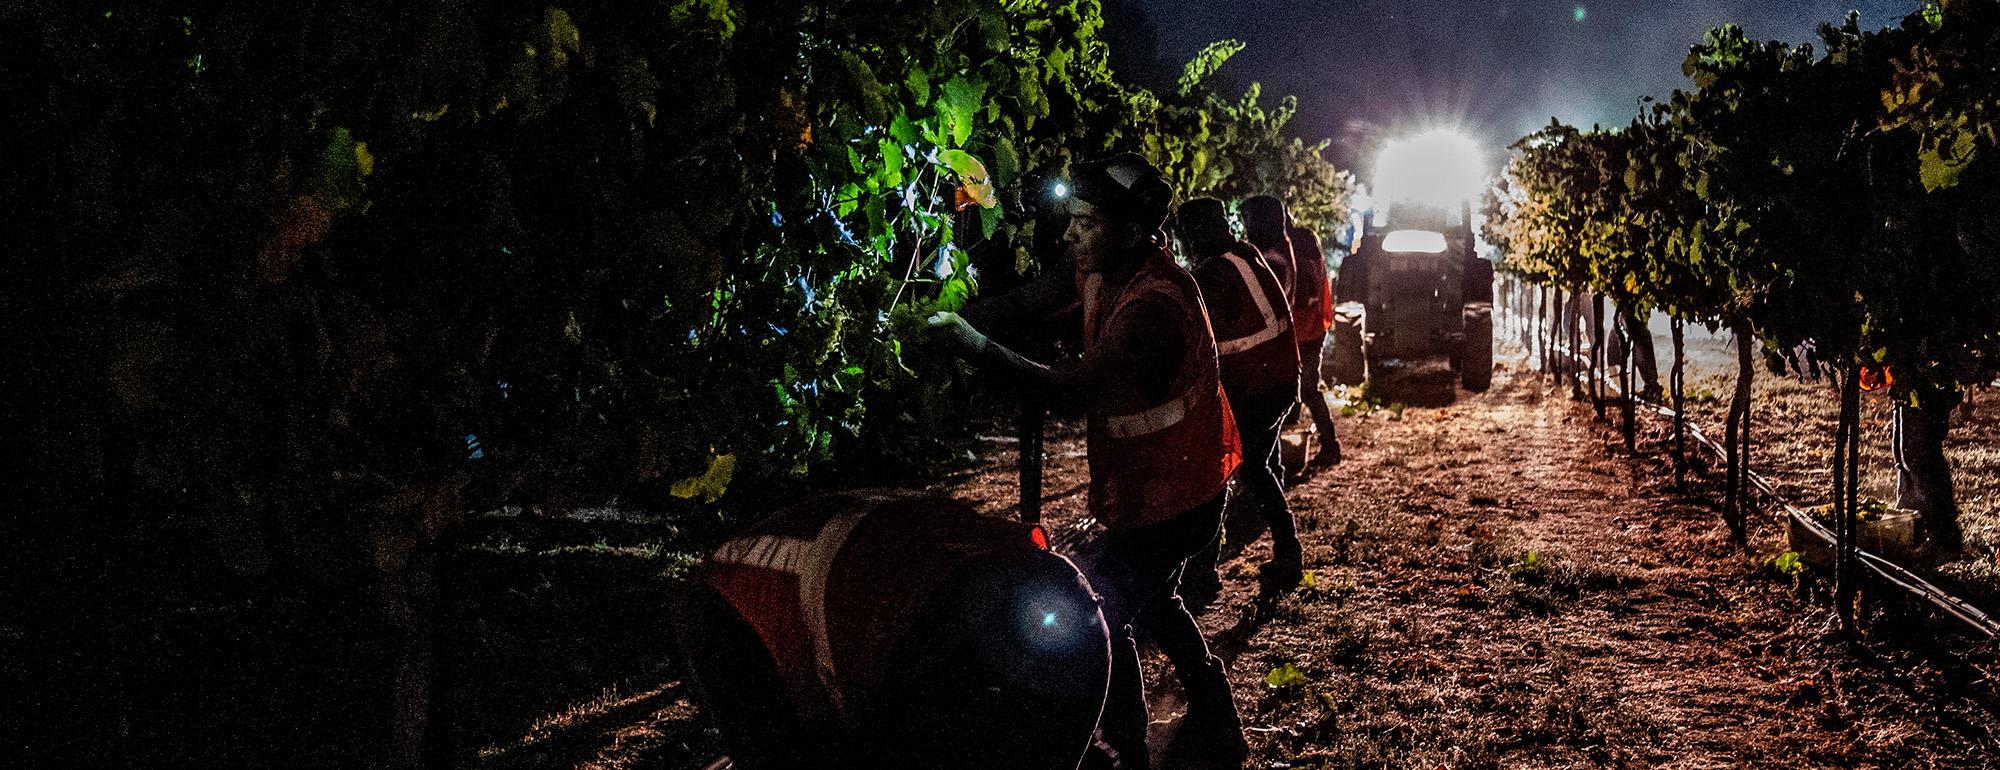 Farmworkers harvest grapes at night